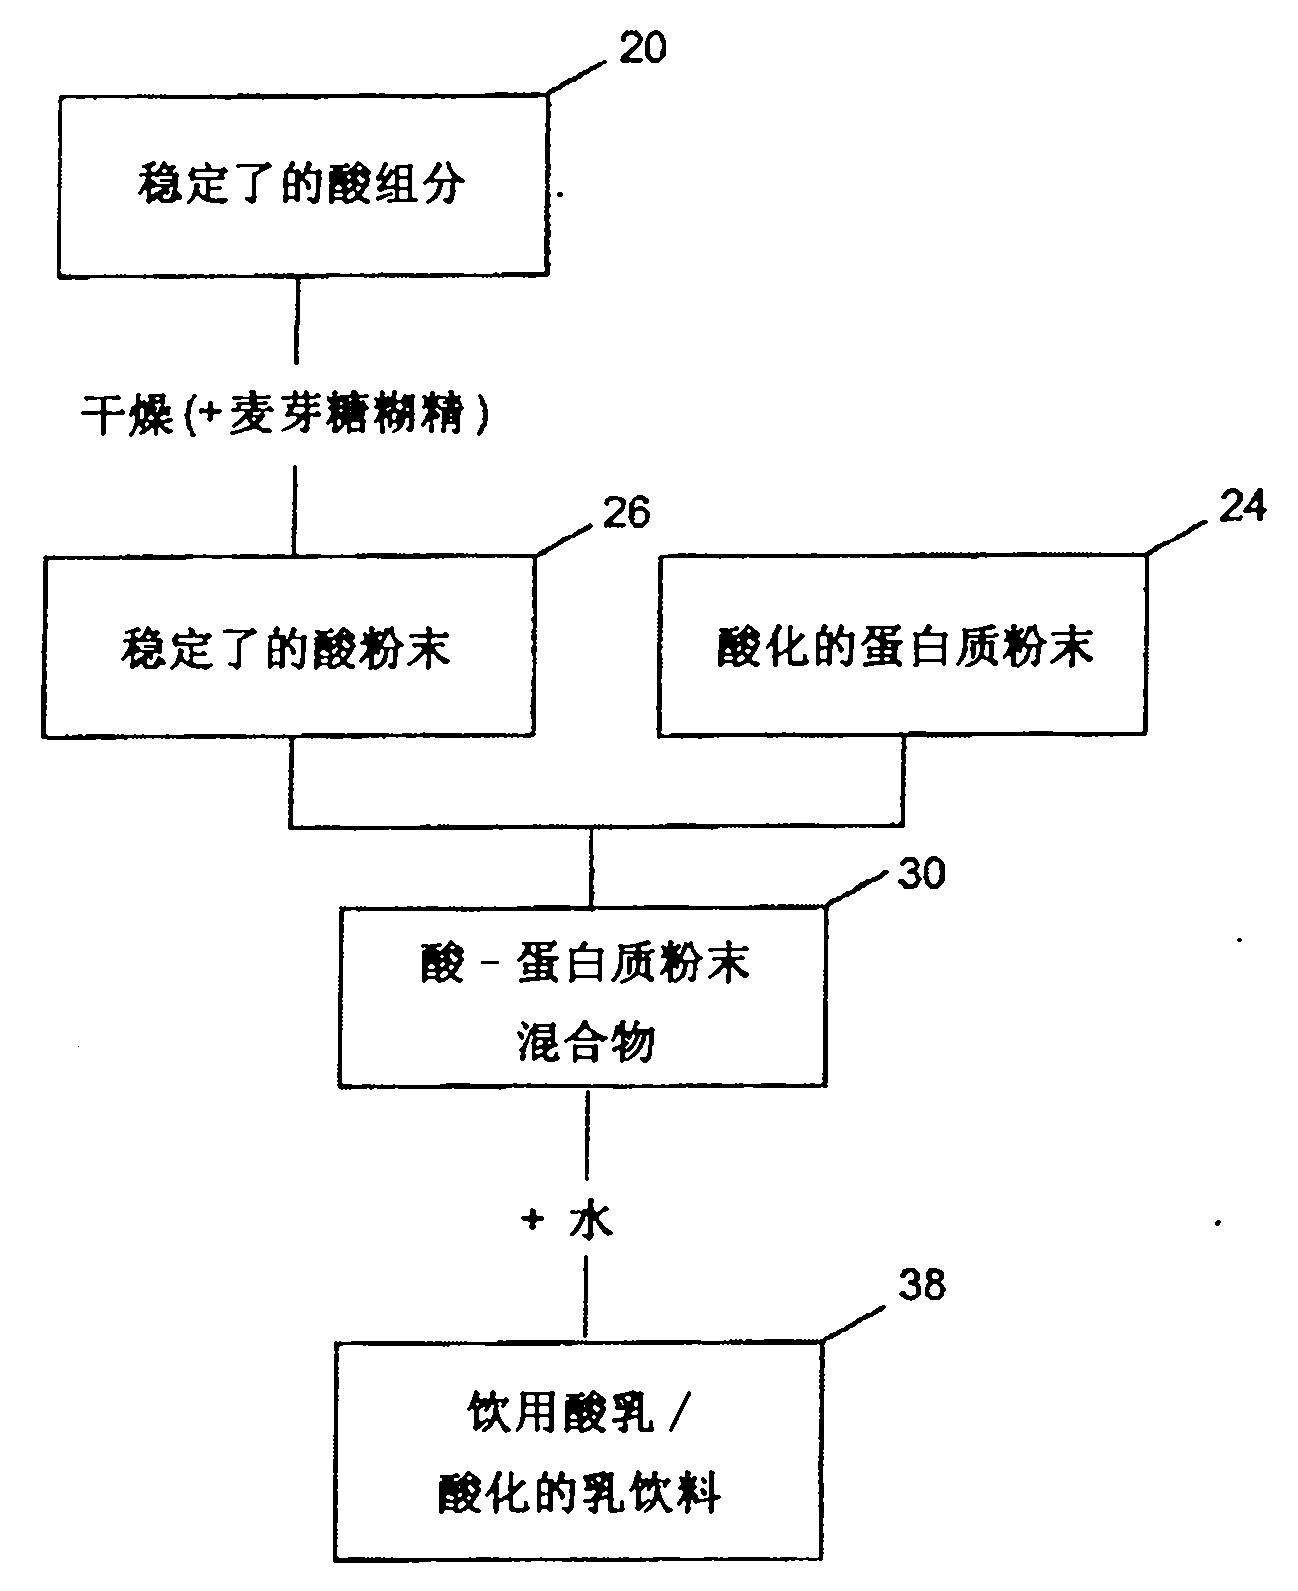 Method of producing acid stable protein products and products so produced